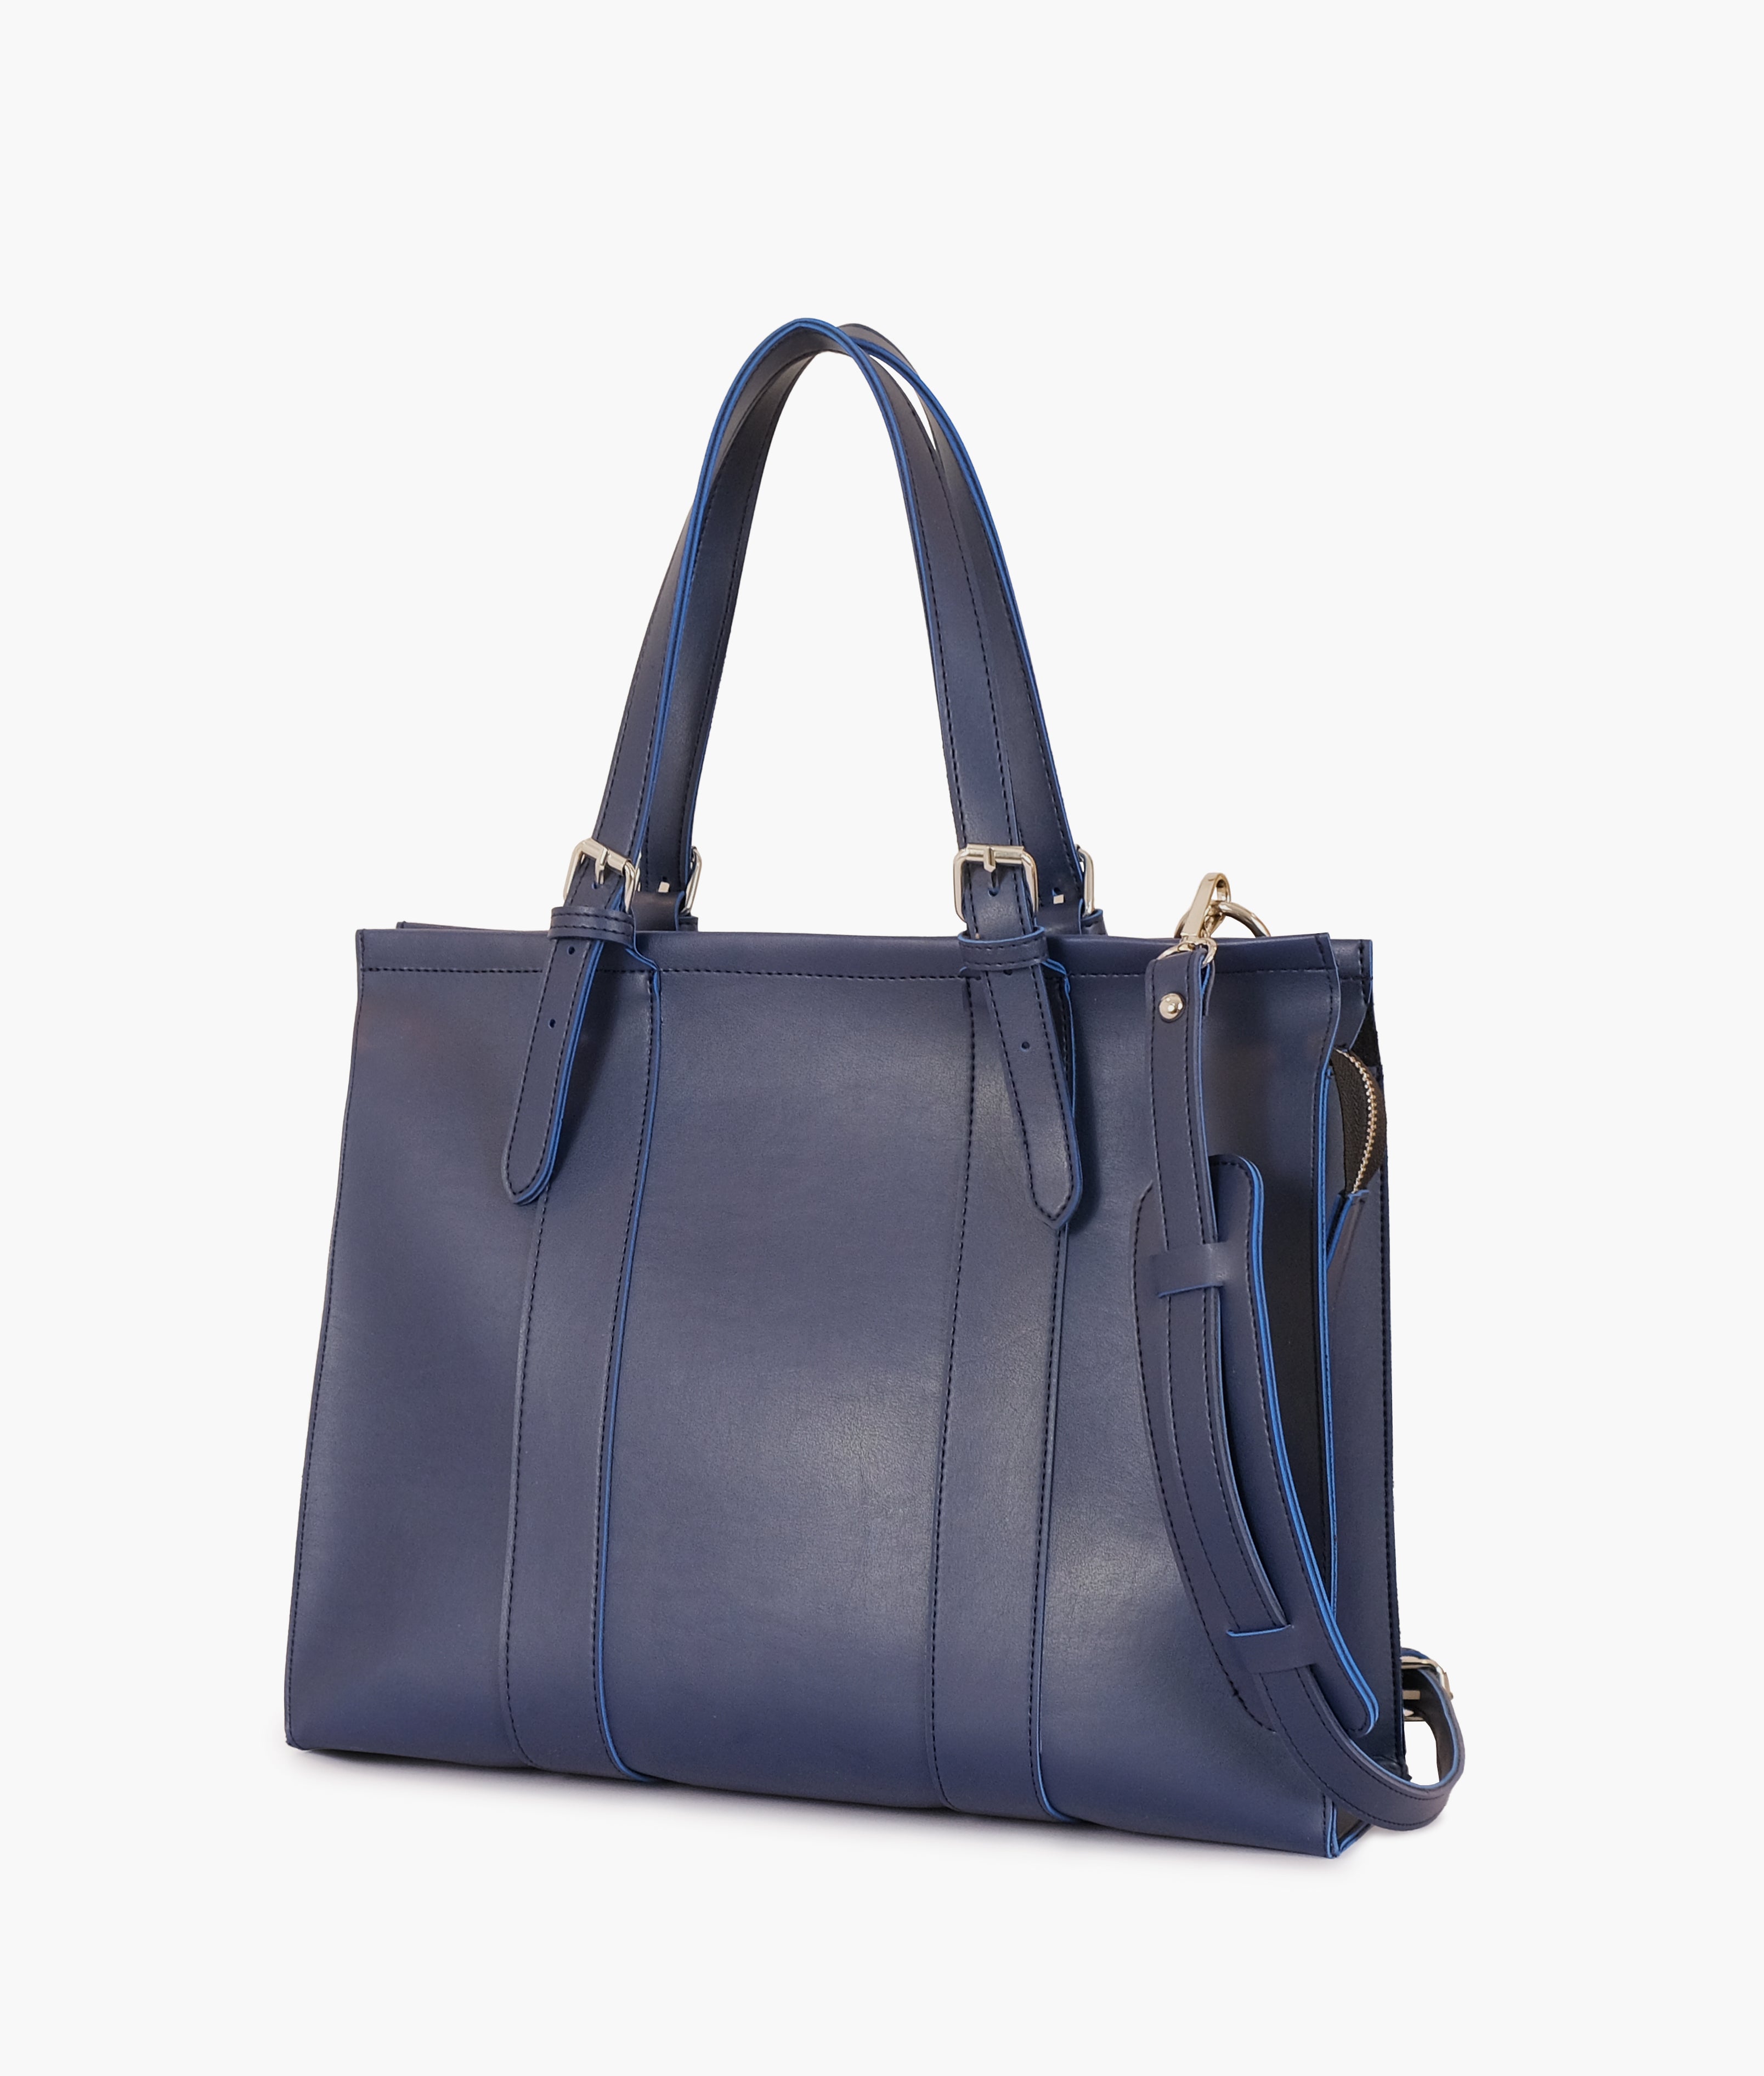 Blue laptop bag with sleeve